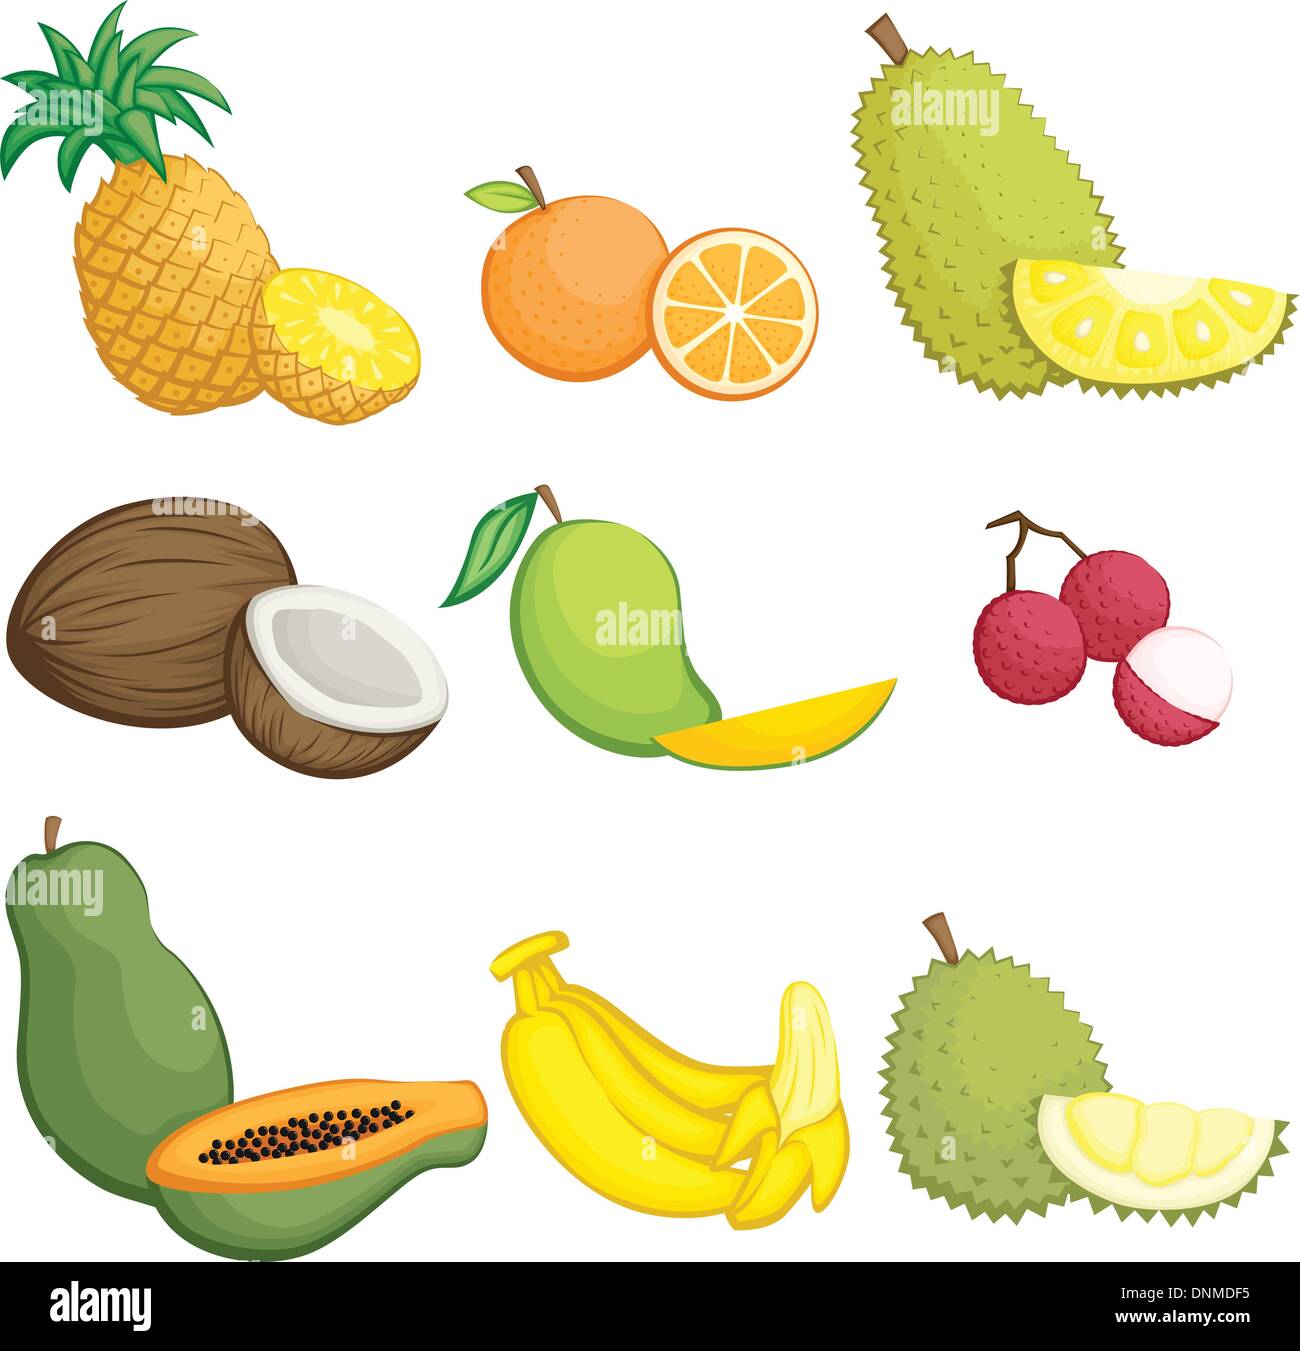 A vector illustration of tropical fruits icons Stock Vector